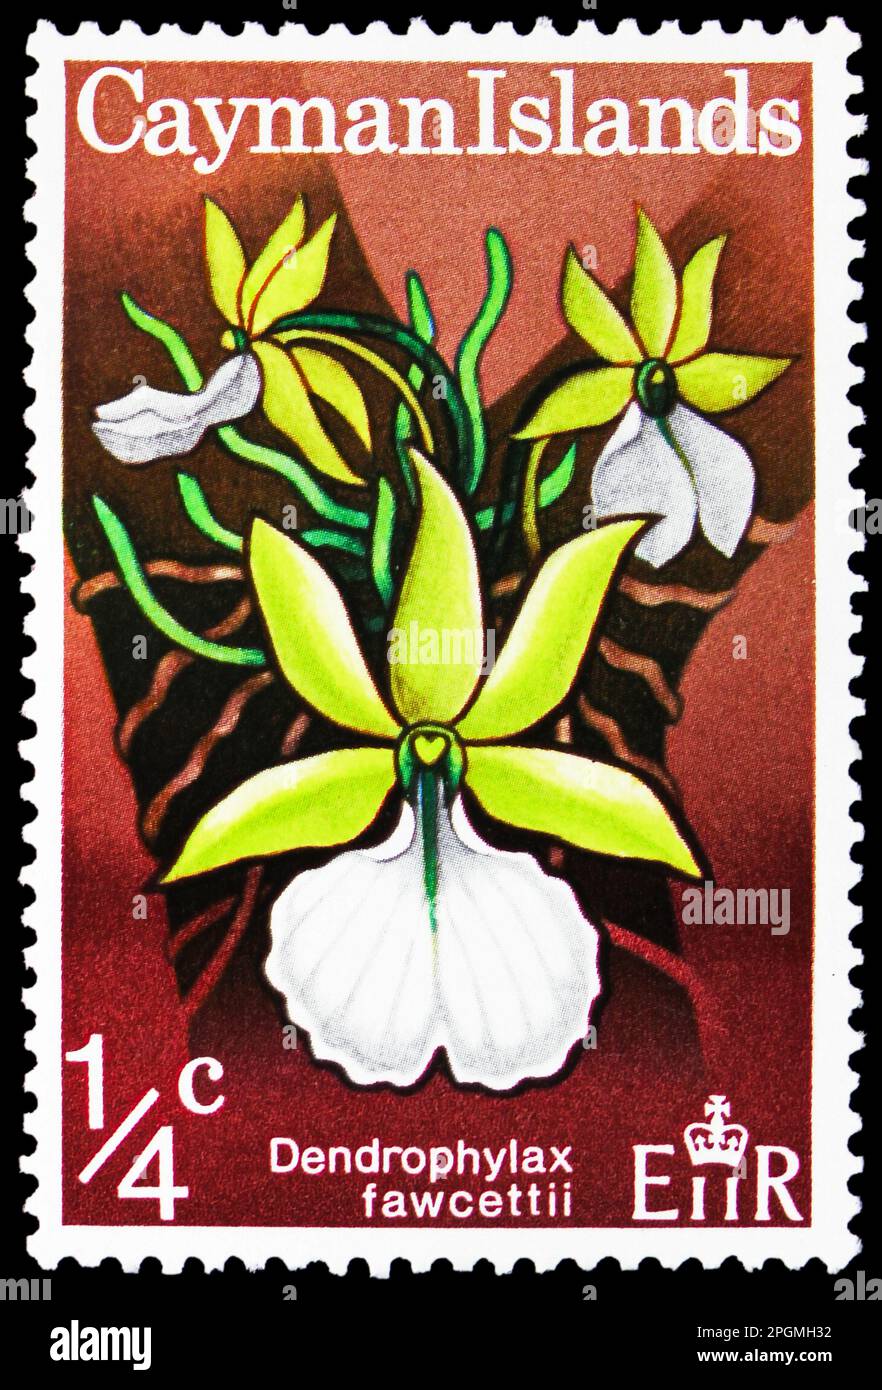 MOSCOW, RUSSIA - MARCH 16, 2023: Postage stamp printed in Cayman Islands shows Dendrophylax fawcettii, Wild Orchids of West Indies serie, circa 1971 Stock Photo